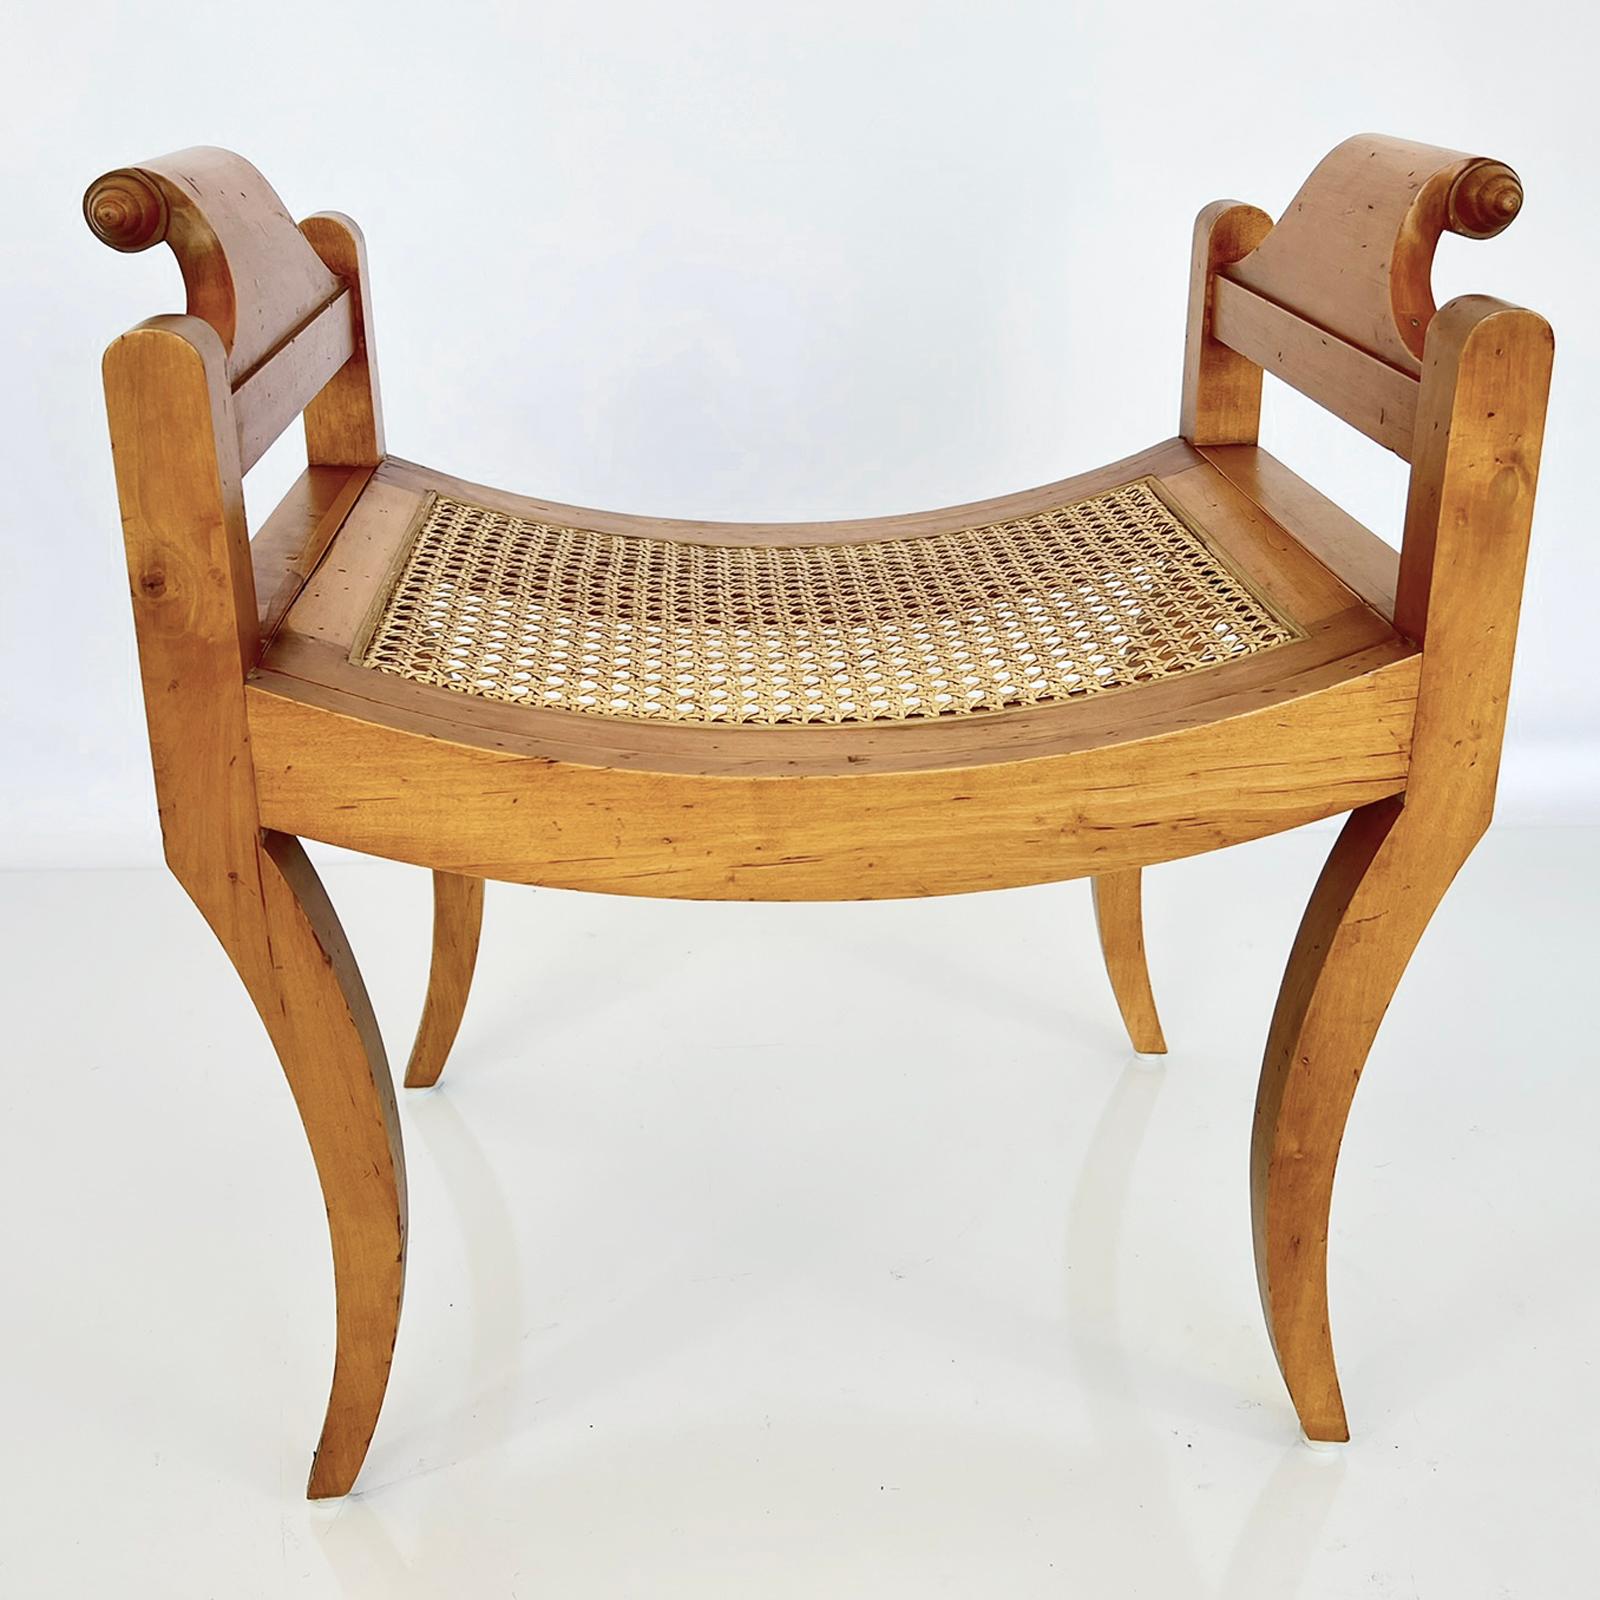 Bench, of satinwood, having a caned seat flanked by outscrolled arms ending in spiral handles, raised on bowed apron, on four sabre legs. 

Stock ID: D1503.